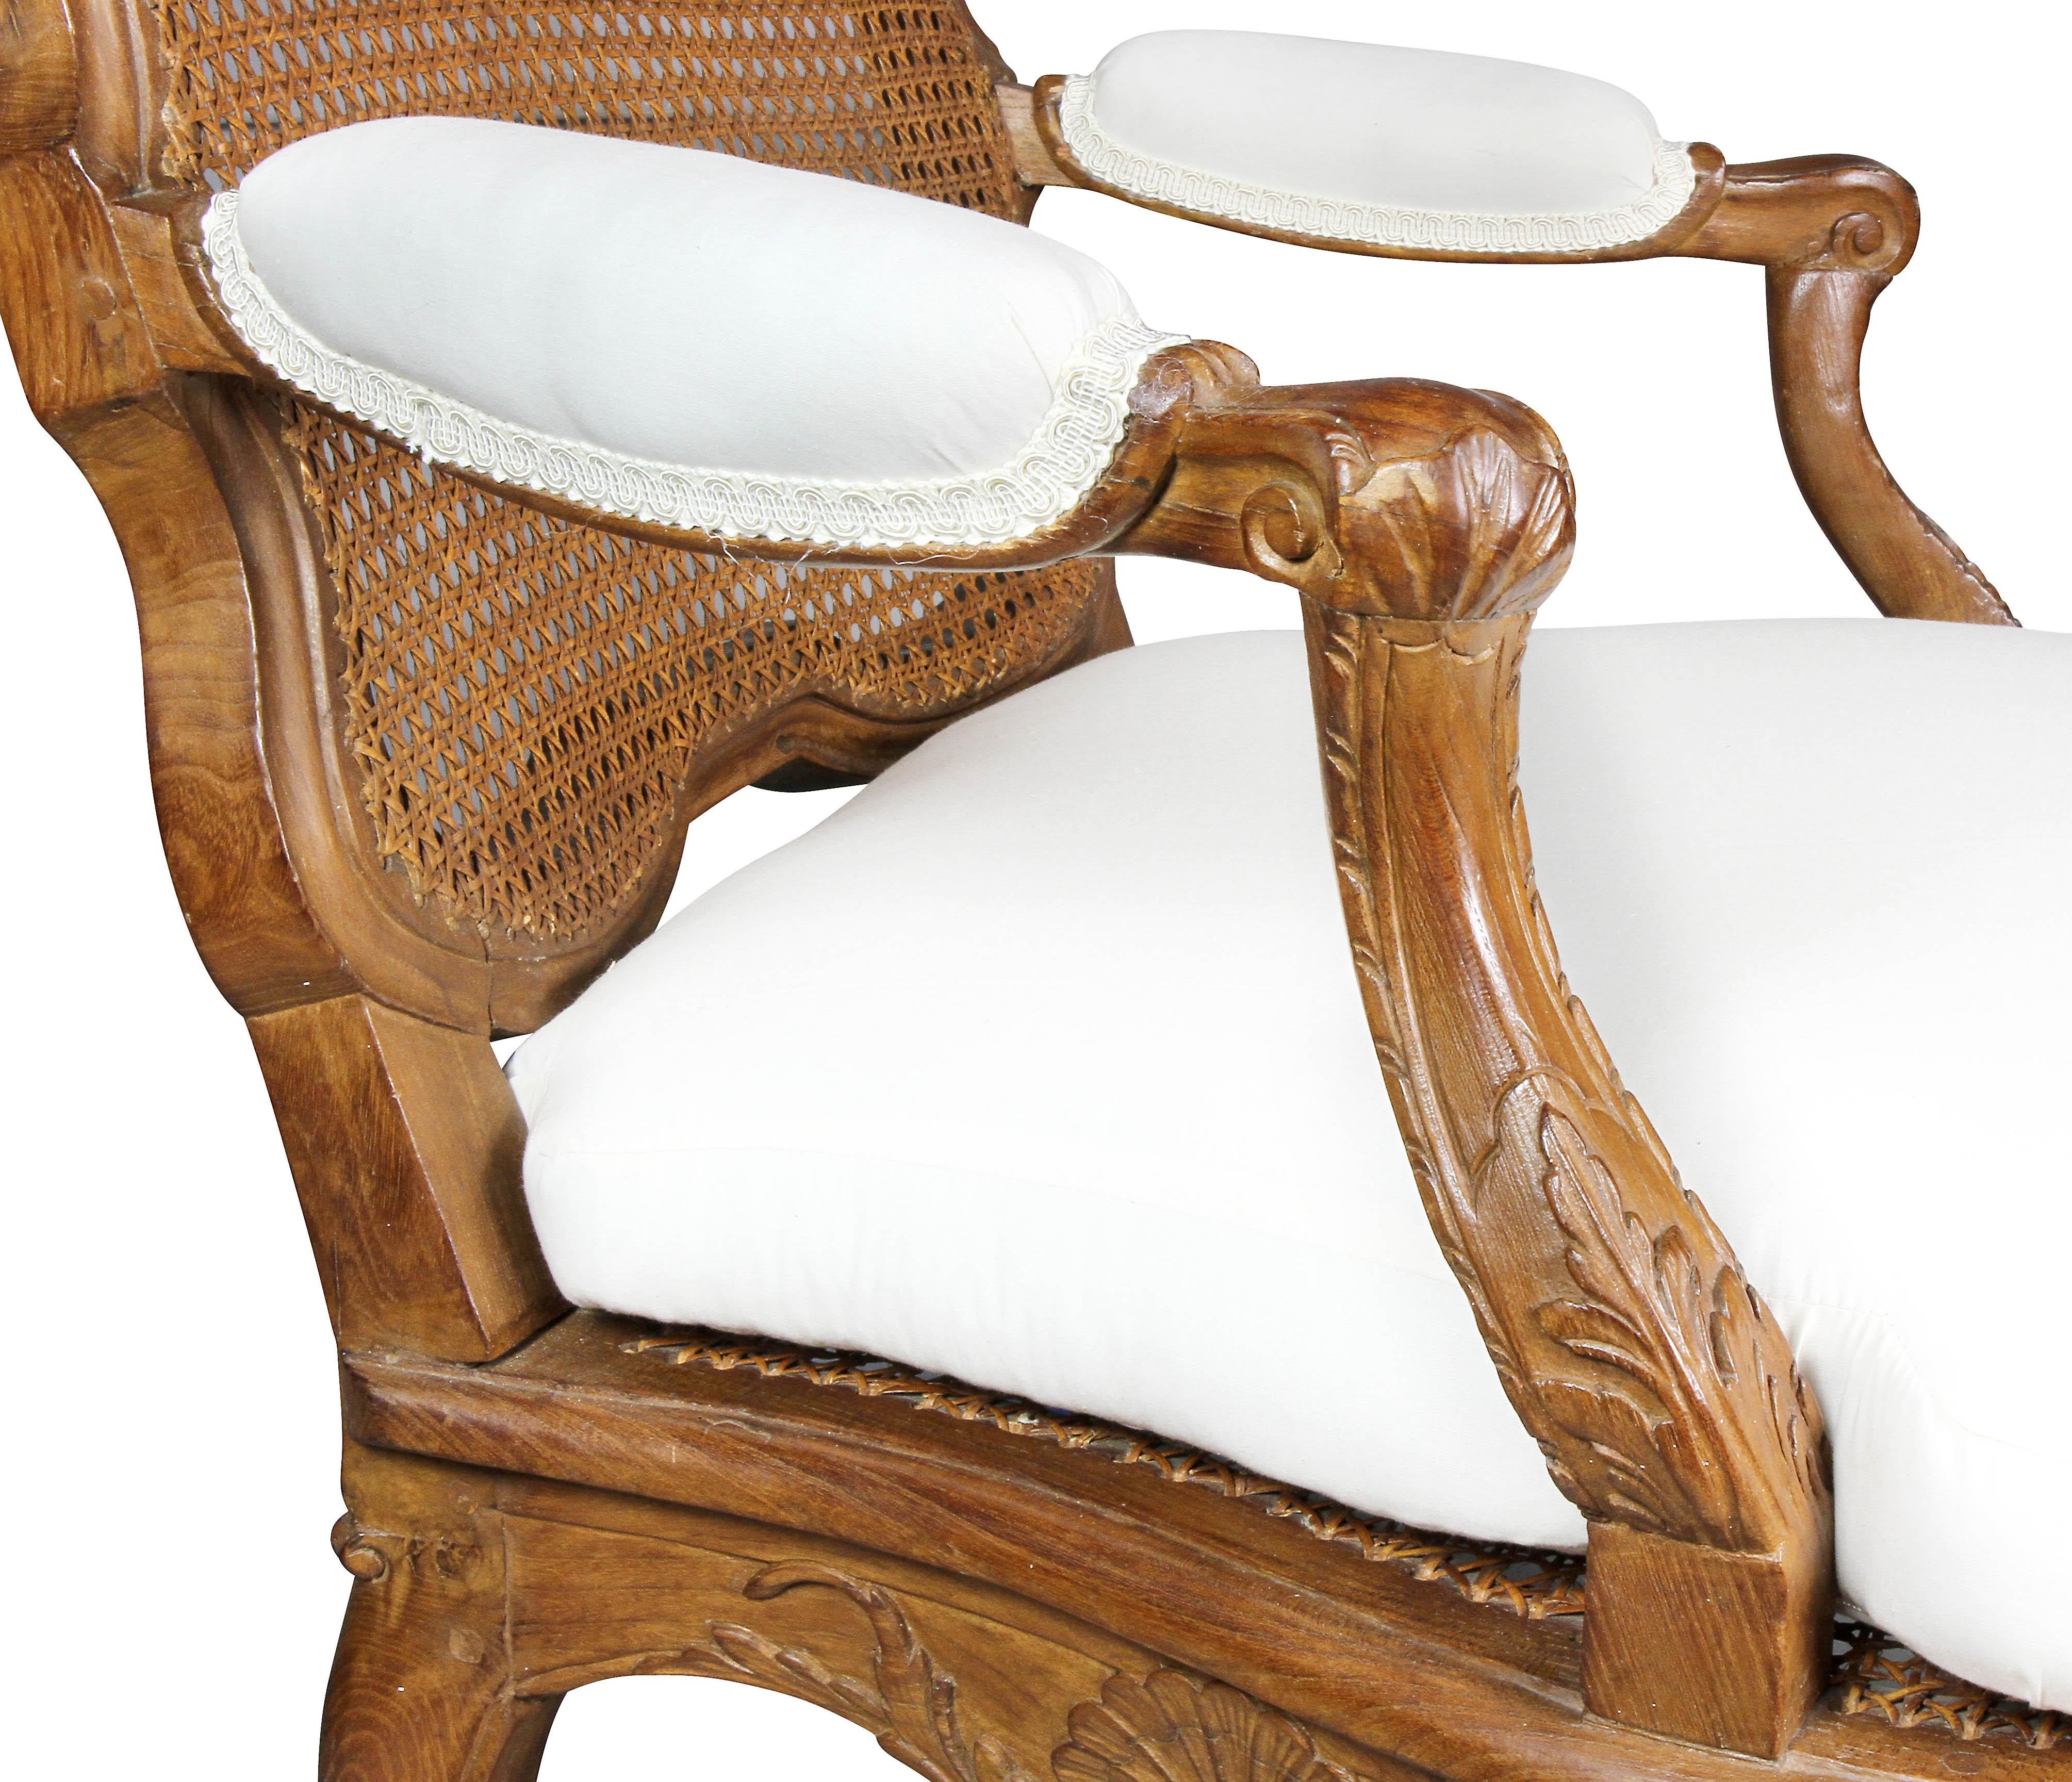 Arched shell carved crest rail surrounding a caned back, serpentine caned seat with loose cushion raised on cabriole legs and shaped-X form stretchers. Provenance; Gene Tyson Antiques, William Hodgins Design.